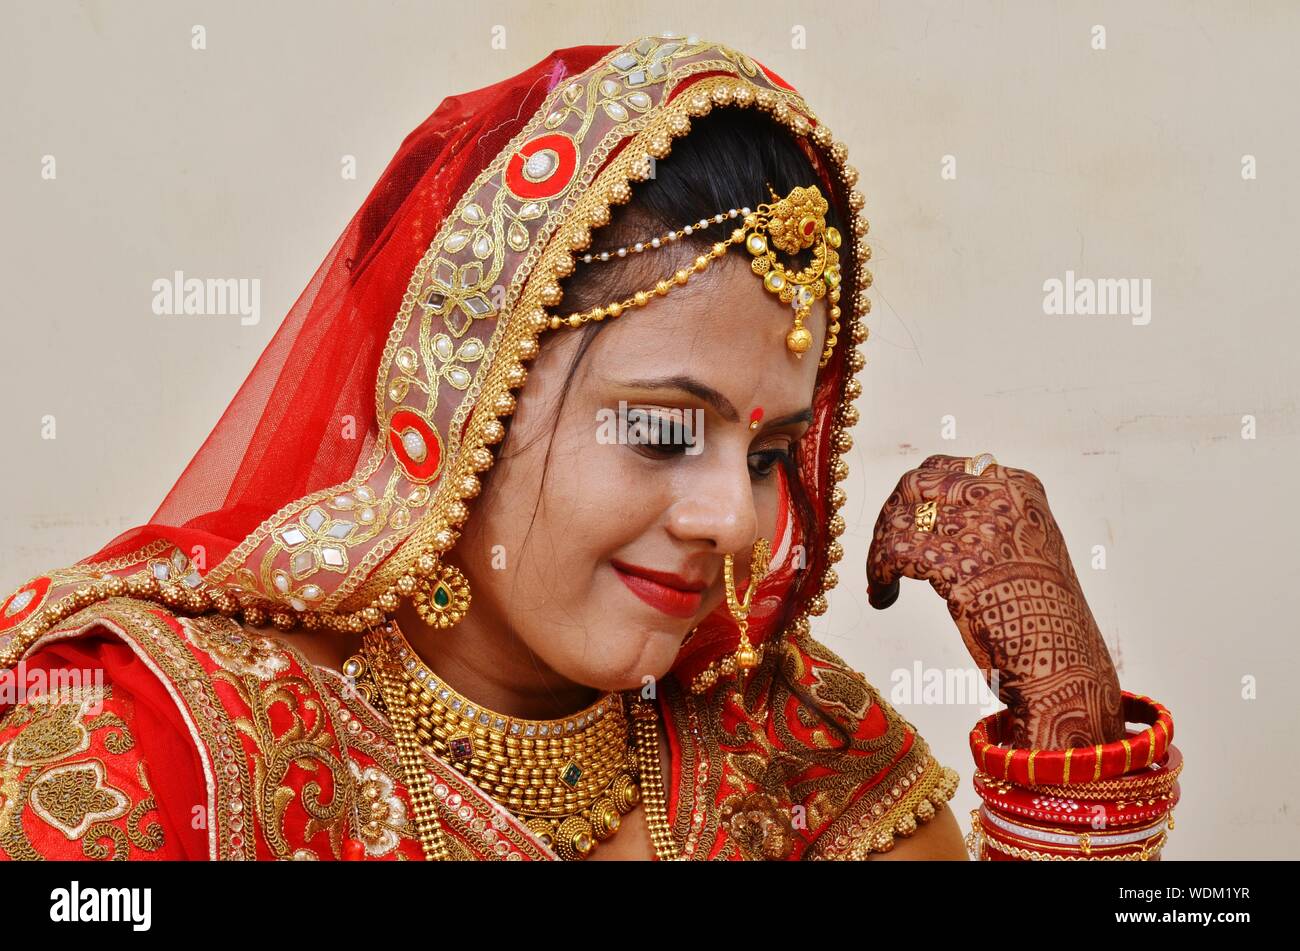 Close-up Of Bride Wearing Red Sari By Wall Stock Photo - Alamy